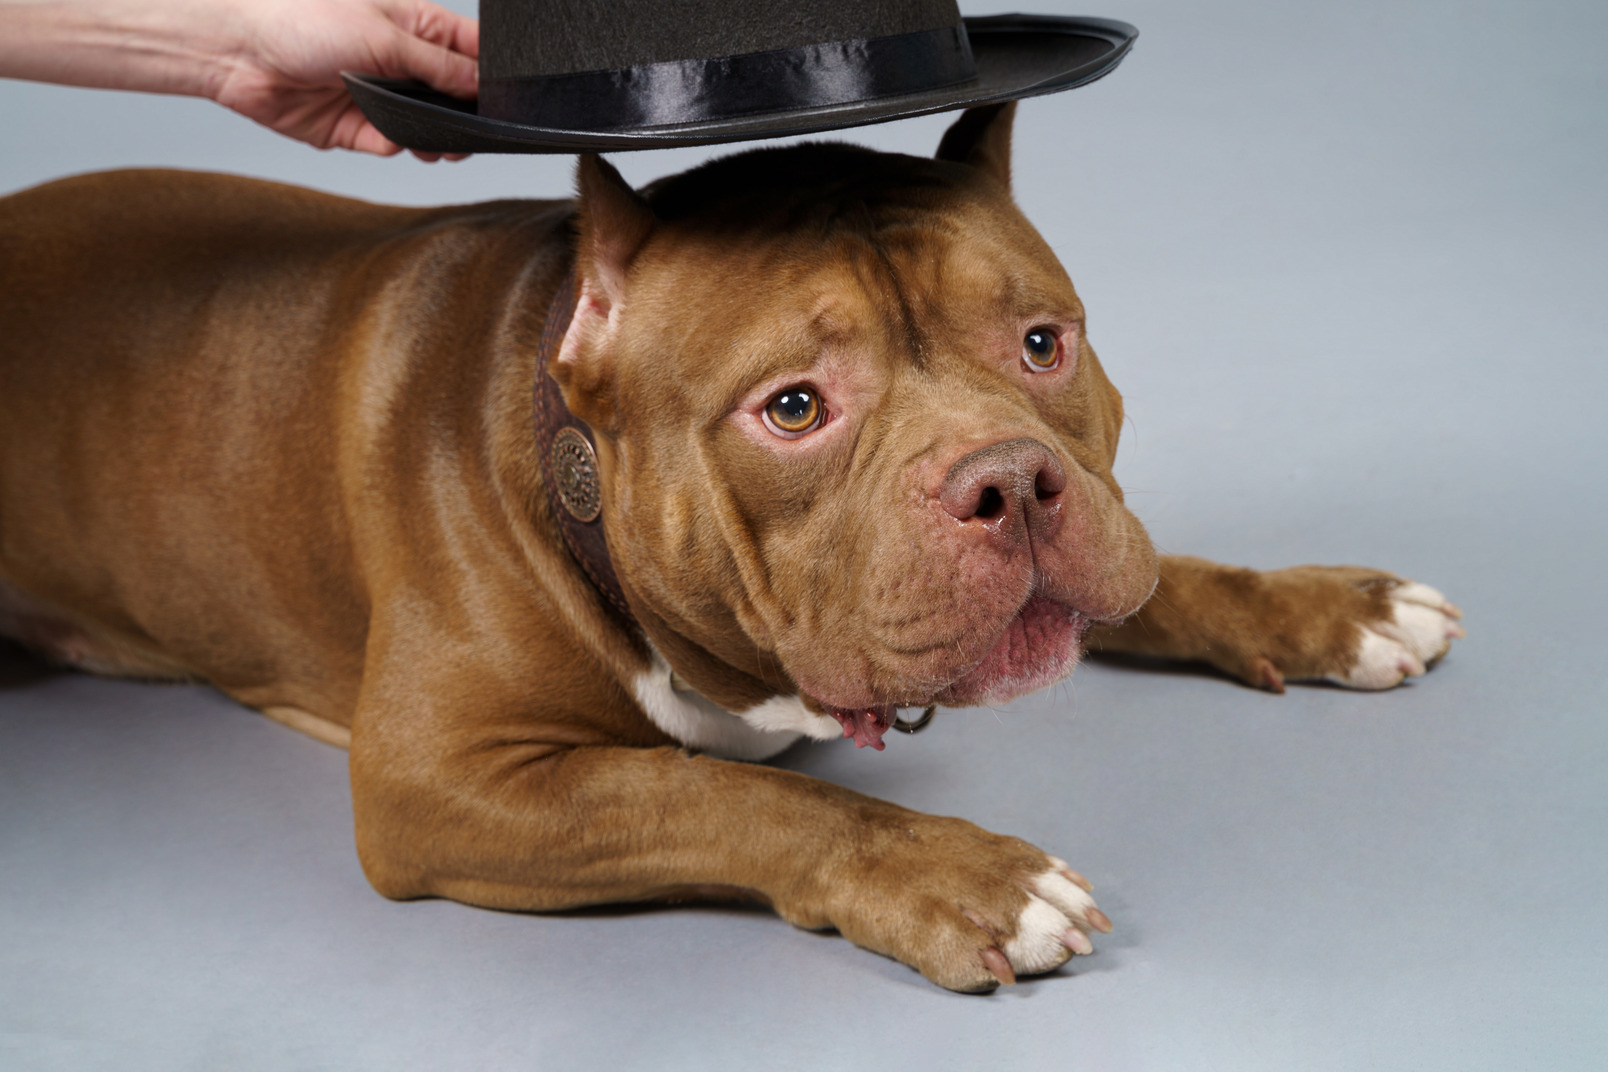 Putting a black hat on a brown bulldog looking aside